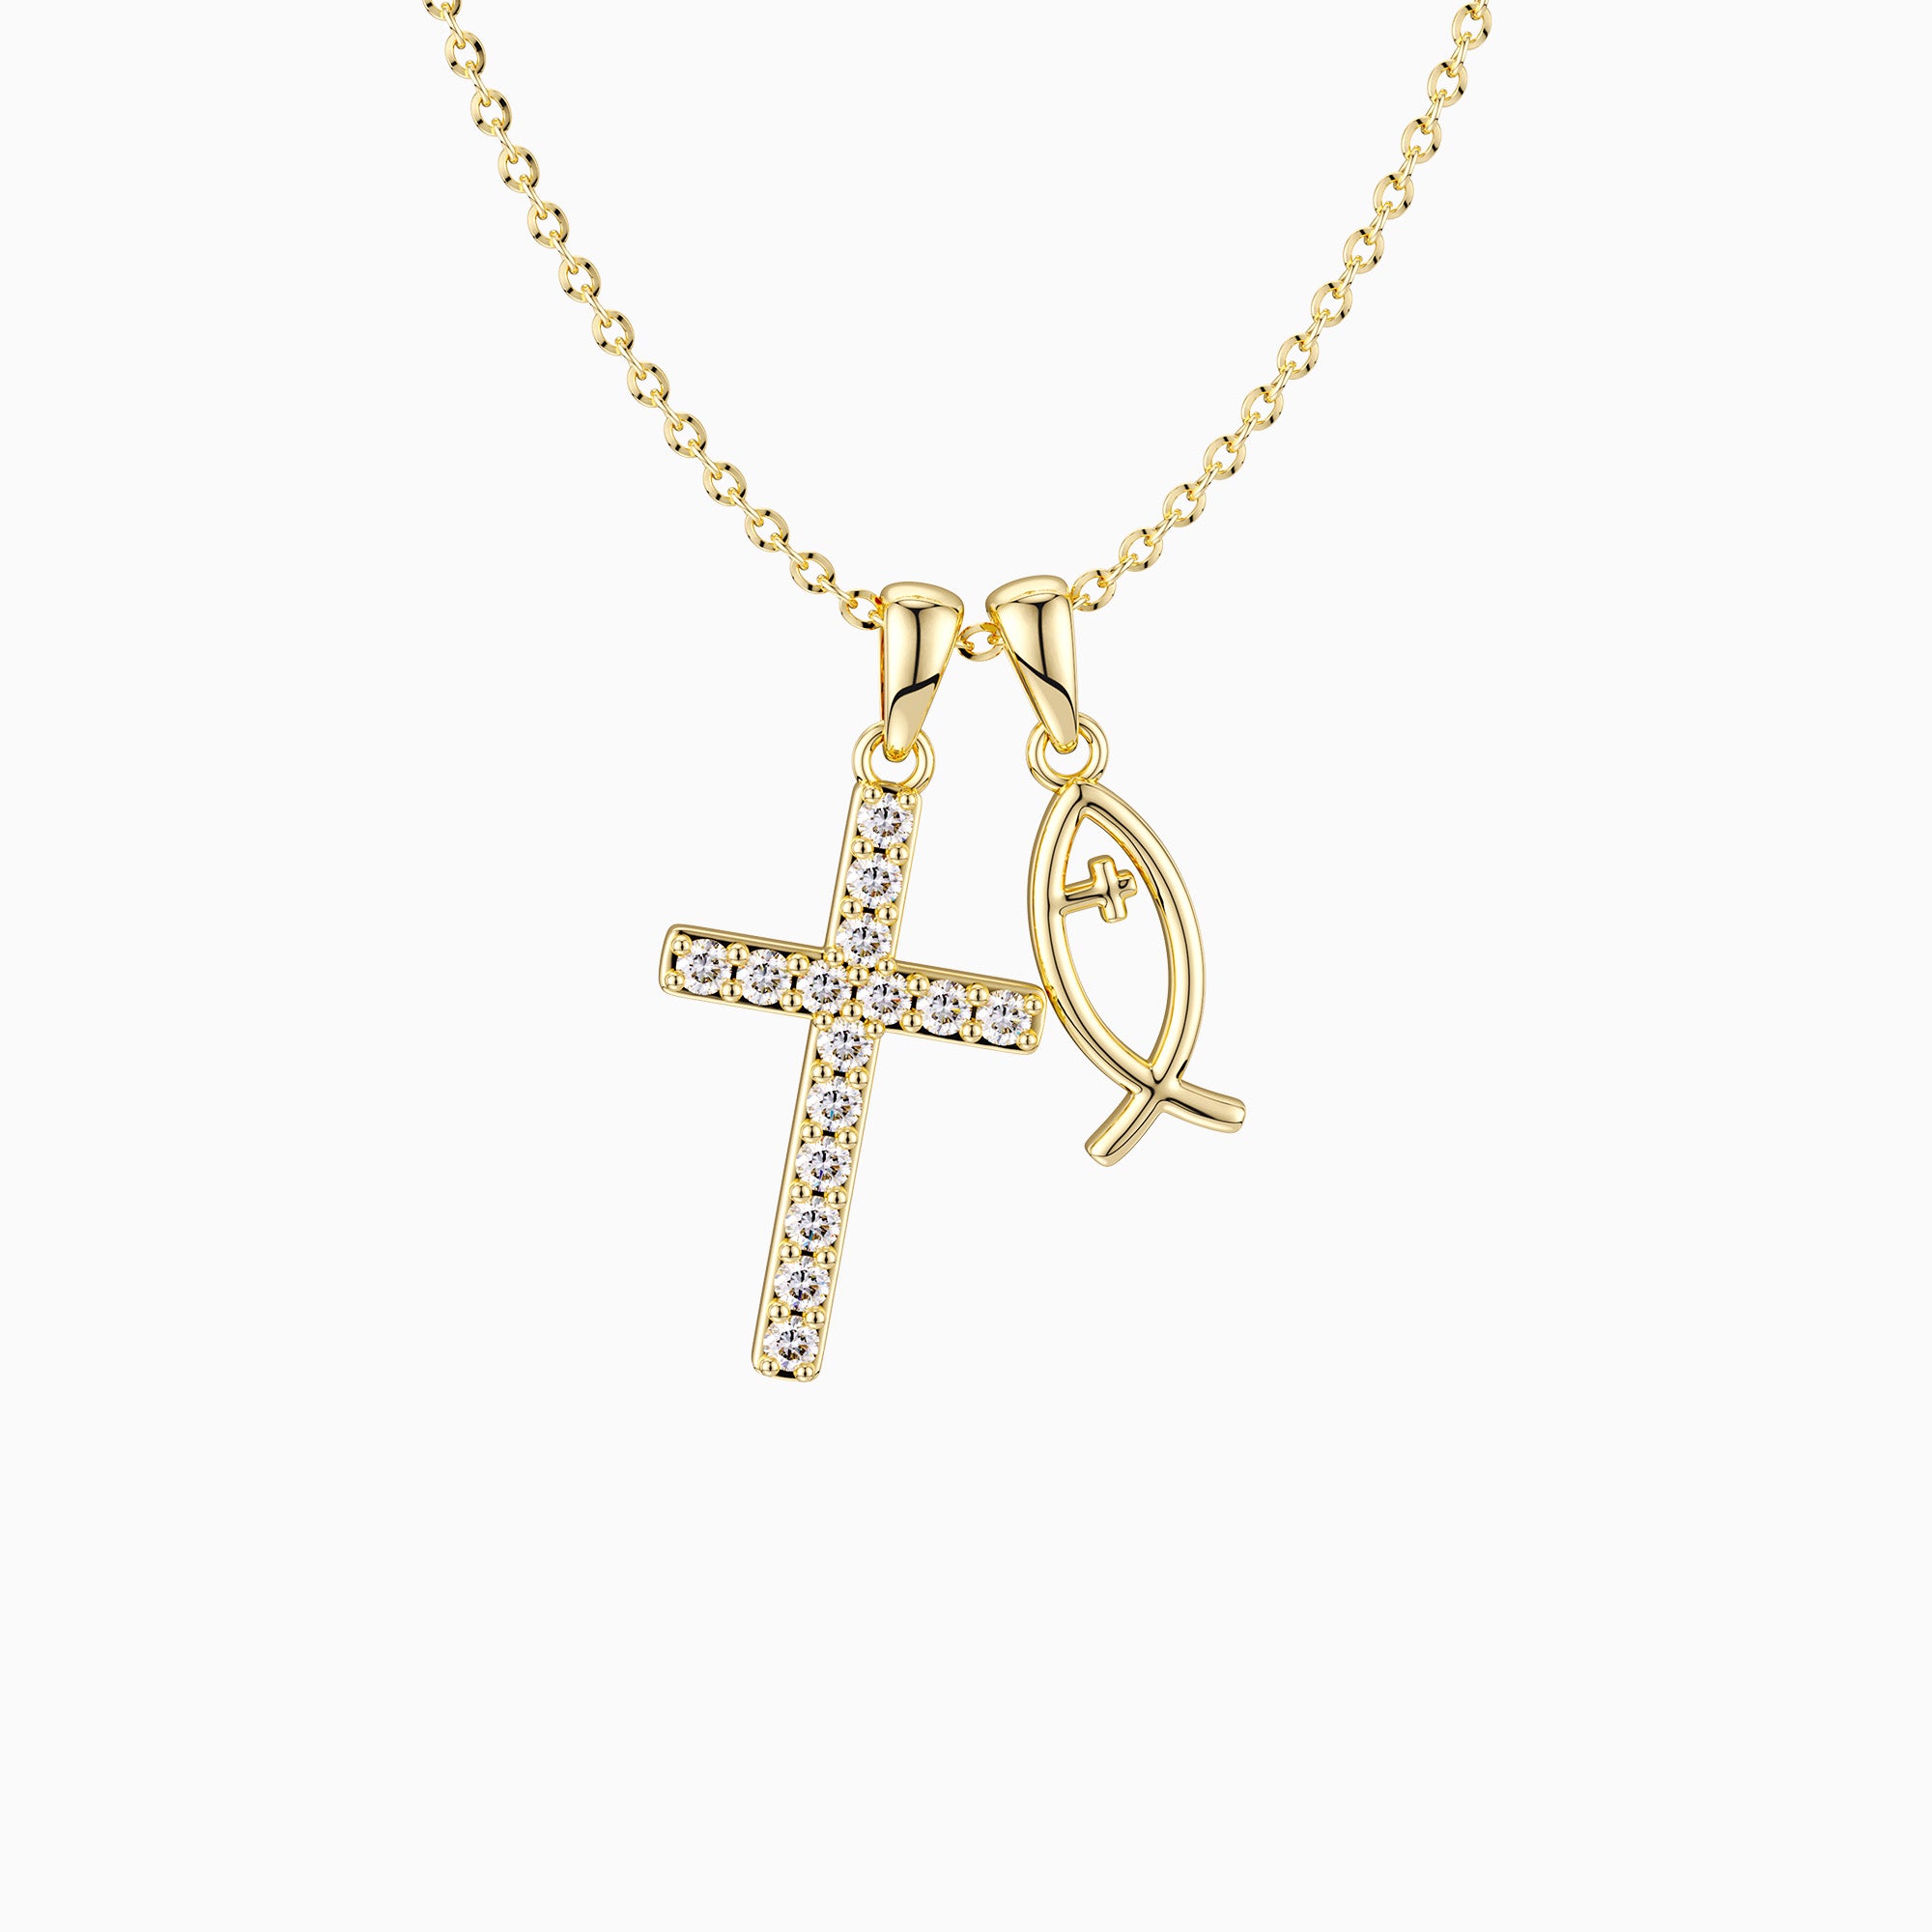 We Will be With You Cross Ichthys Necklace - vanimy